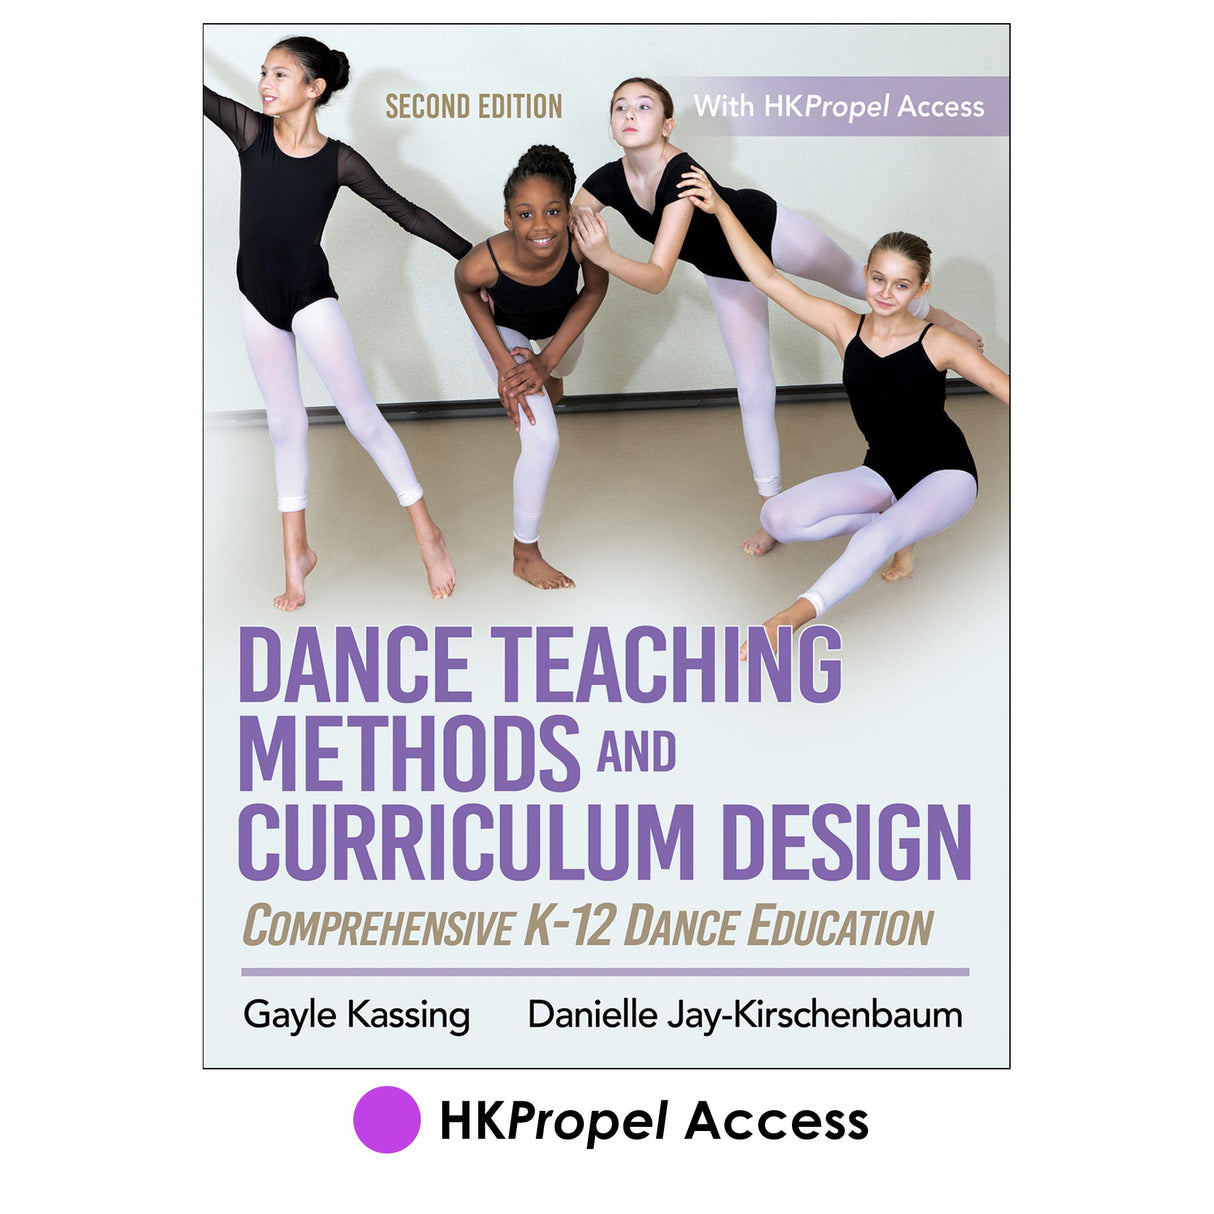 Dance Teaching Methods and Curriculum Design 2nd Edition HKPropel Access